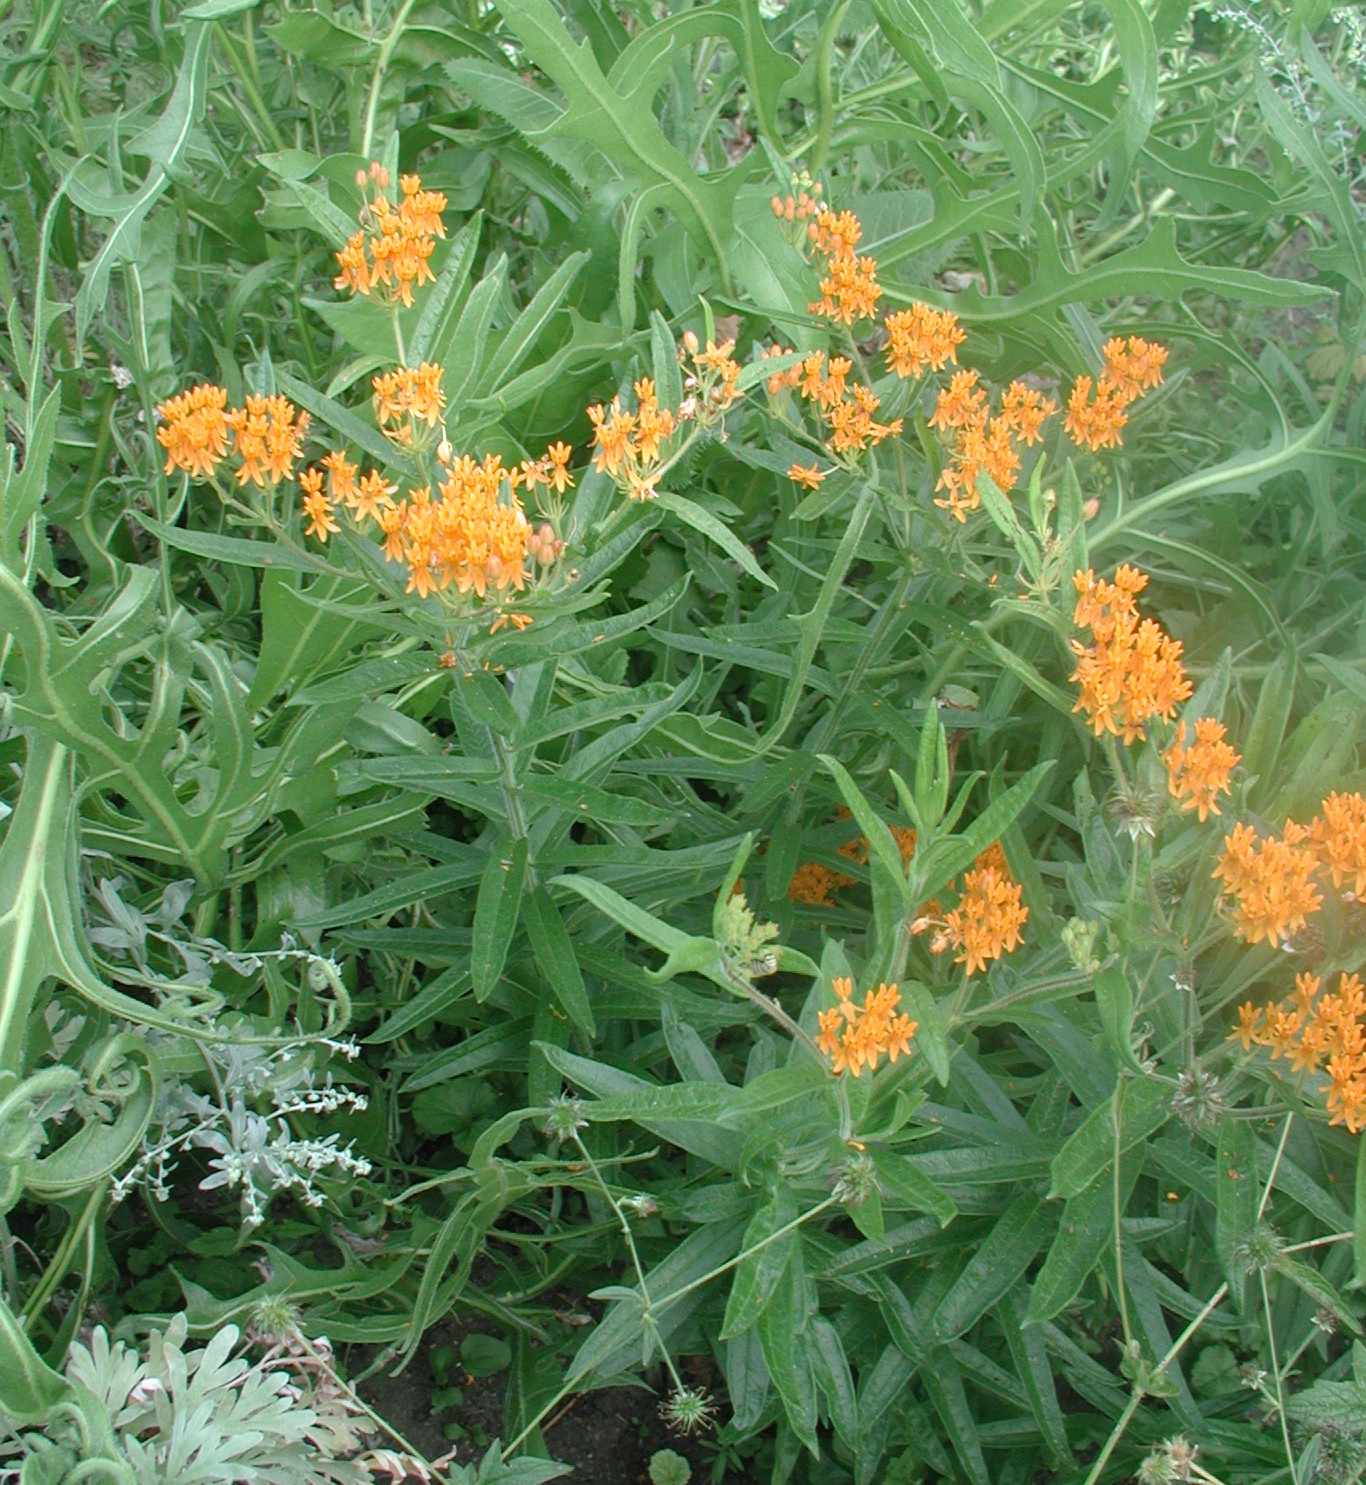 A lush, green patch of plants with groups of small orange flowers